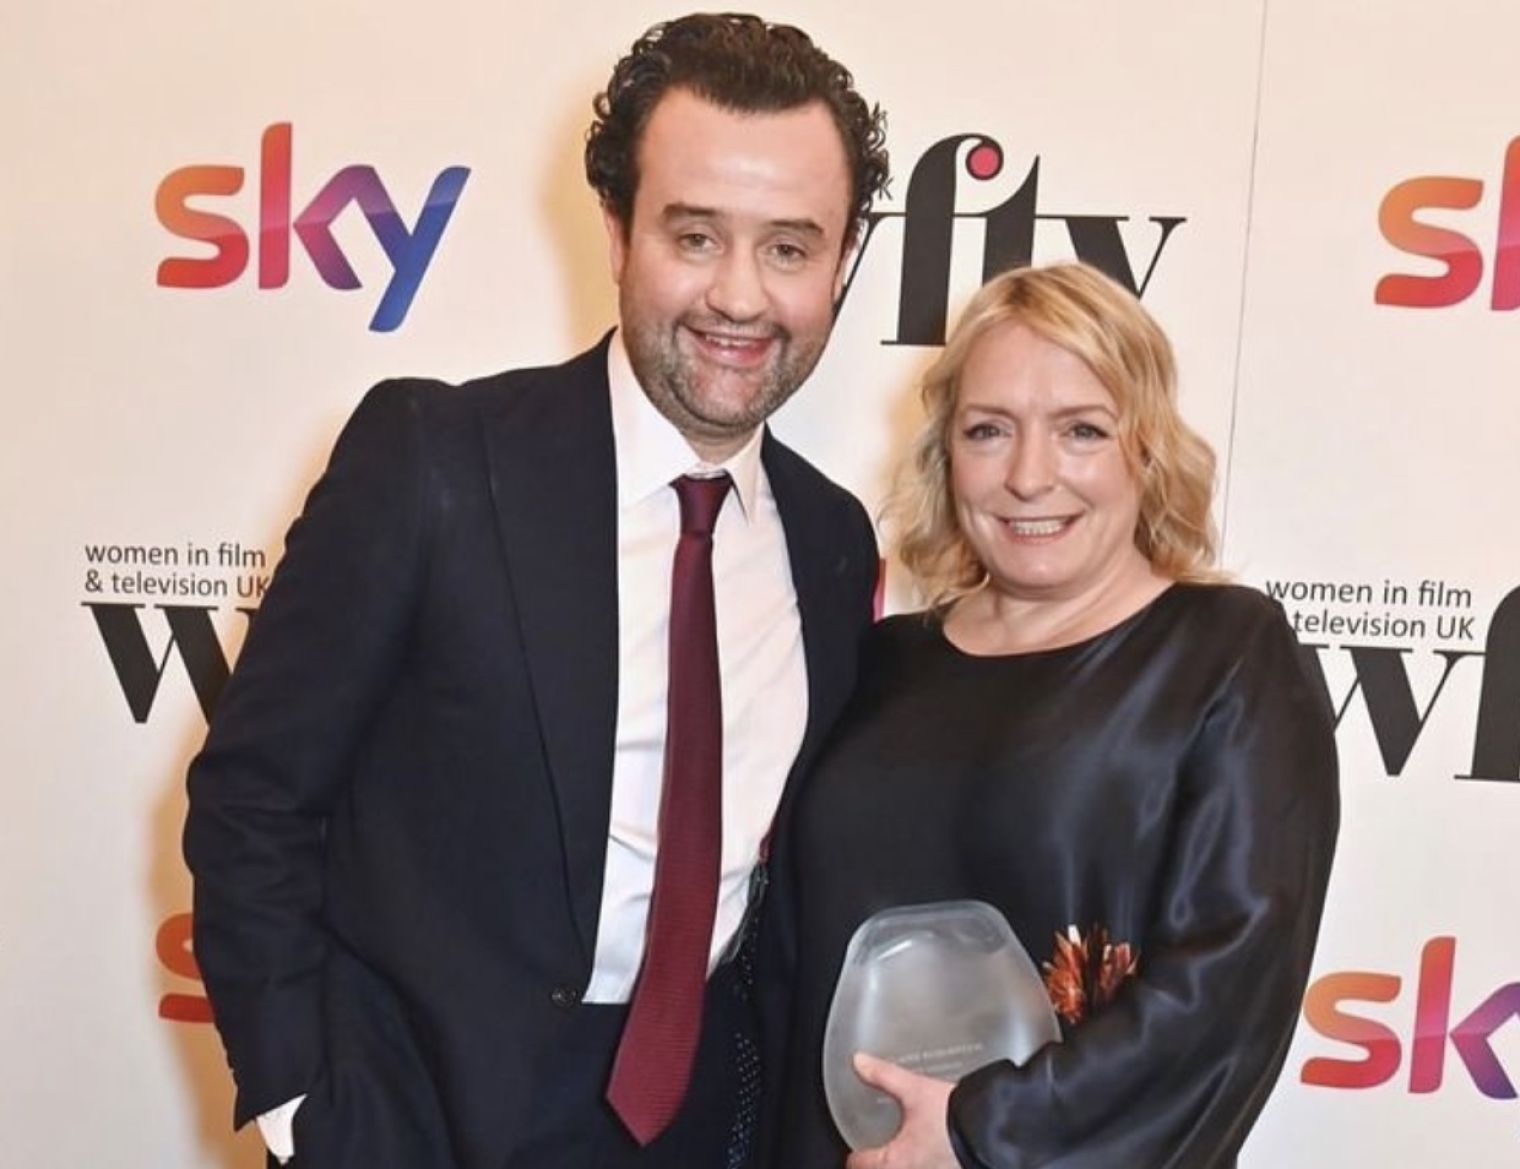 Claire Rushbrook has won the Best Performance Award at this year's Women in Film and TV (WFTV) Awards which took place on Friday night